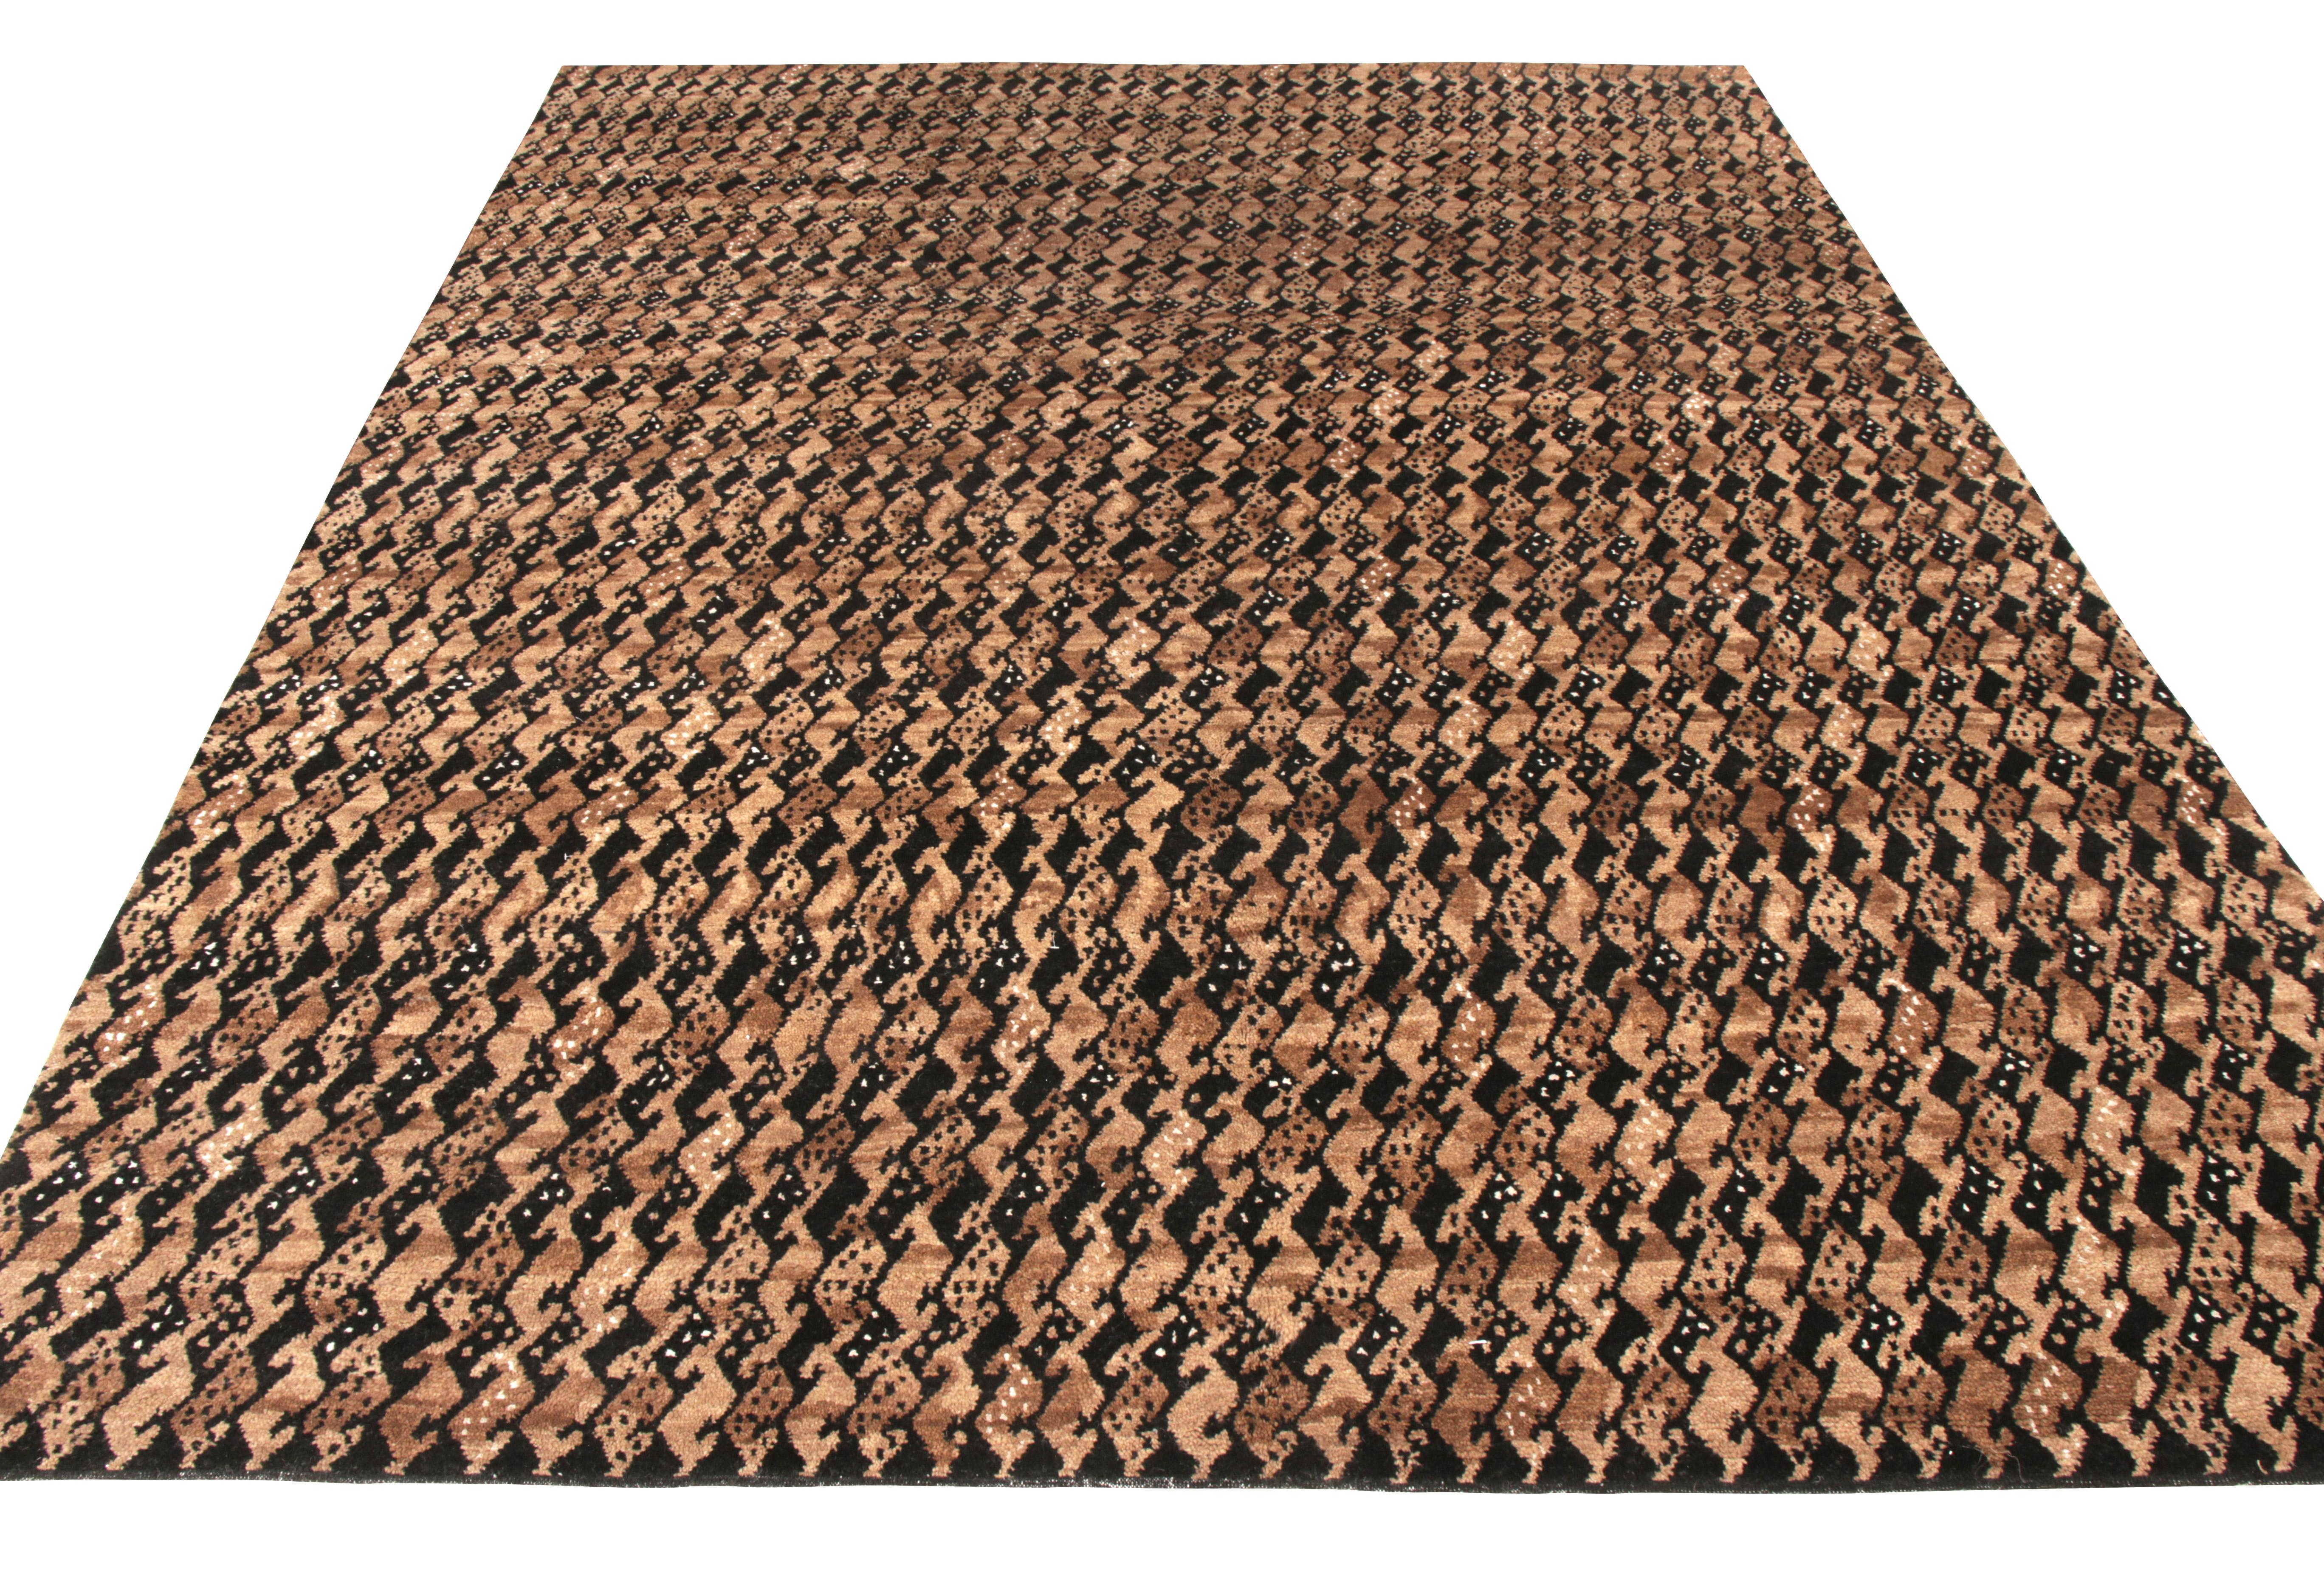 A 9 x 12 ode to Swedish style belonging to Rug & Kilim’s Scandinavian pile collection. Hand knotted in wool, the rug draws artistic inspiration from the most exemplary mid-century Scandinavian sensibilities of design and color. The drawing enjoys a